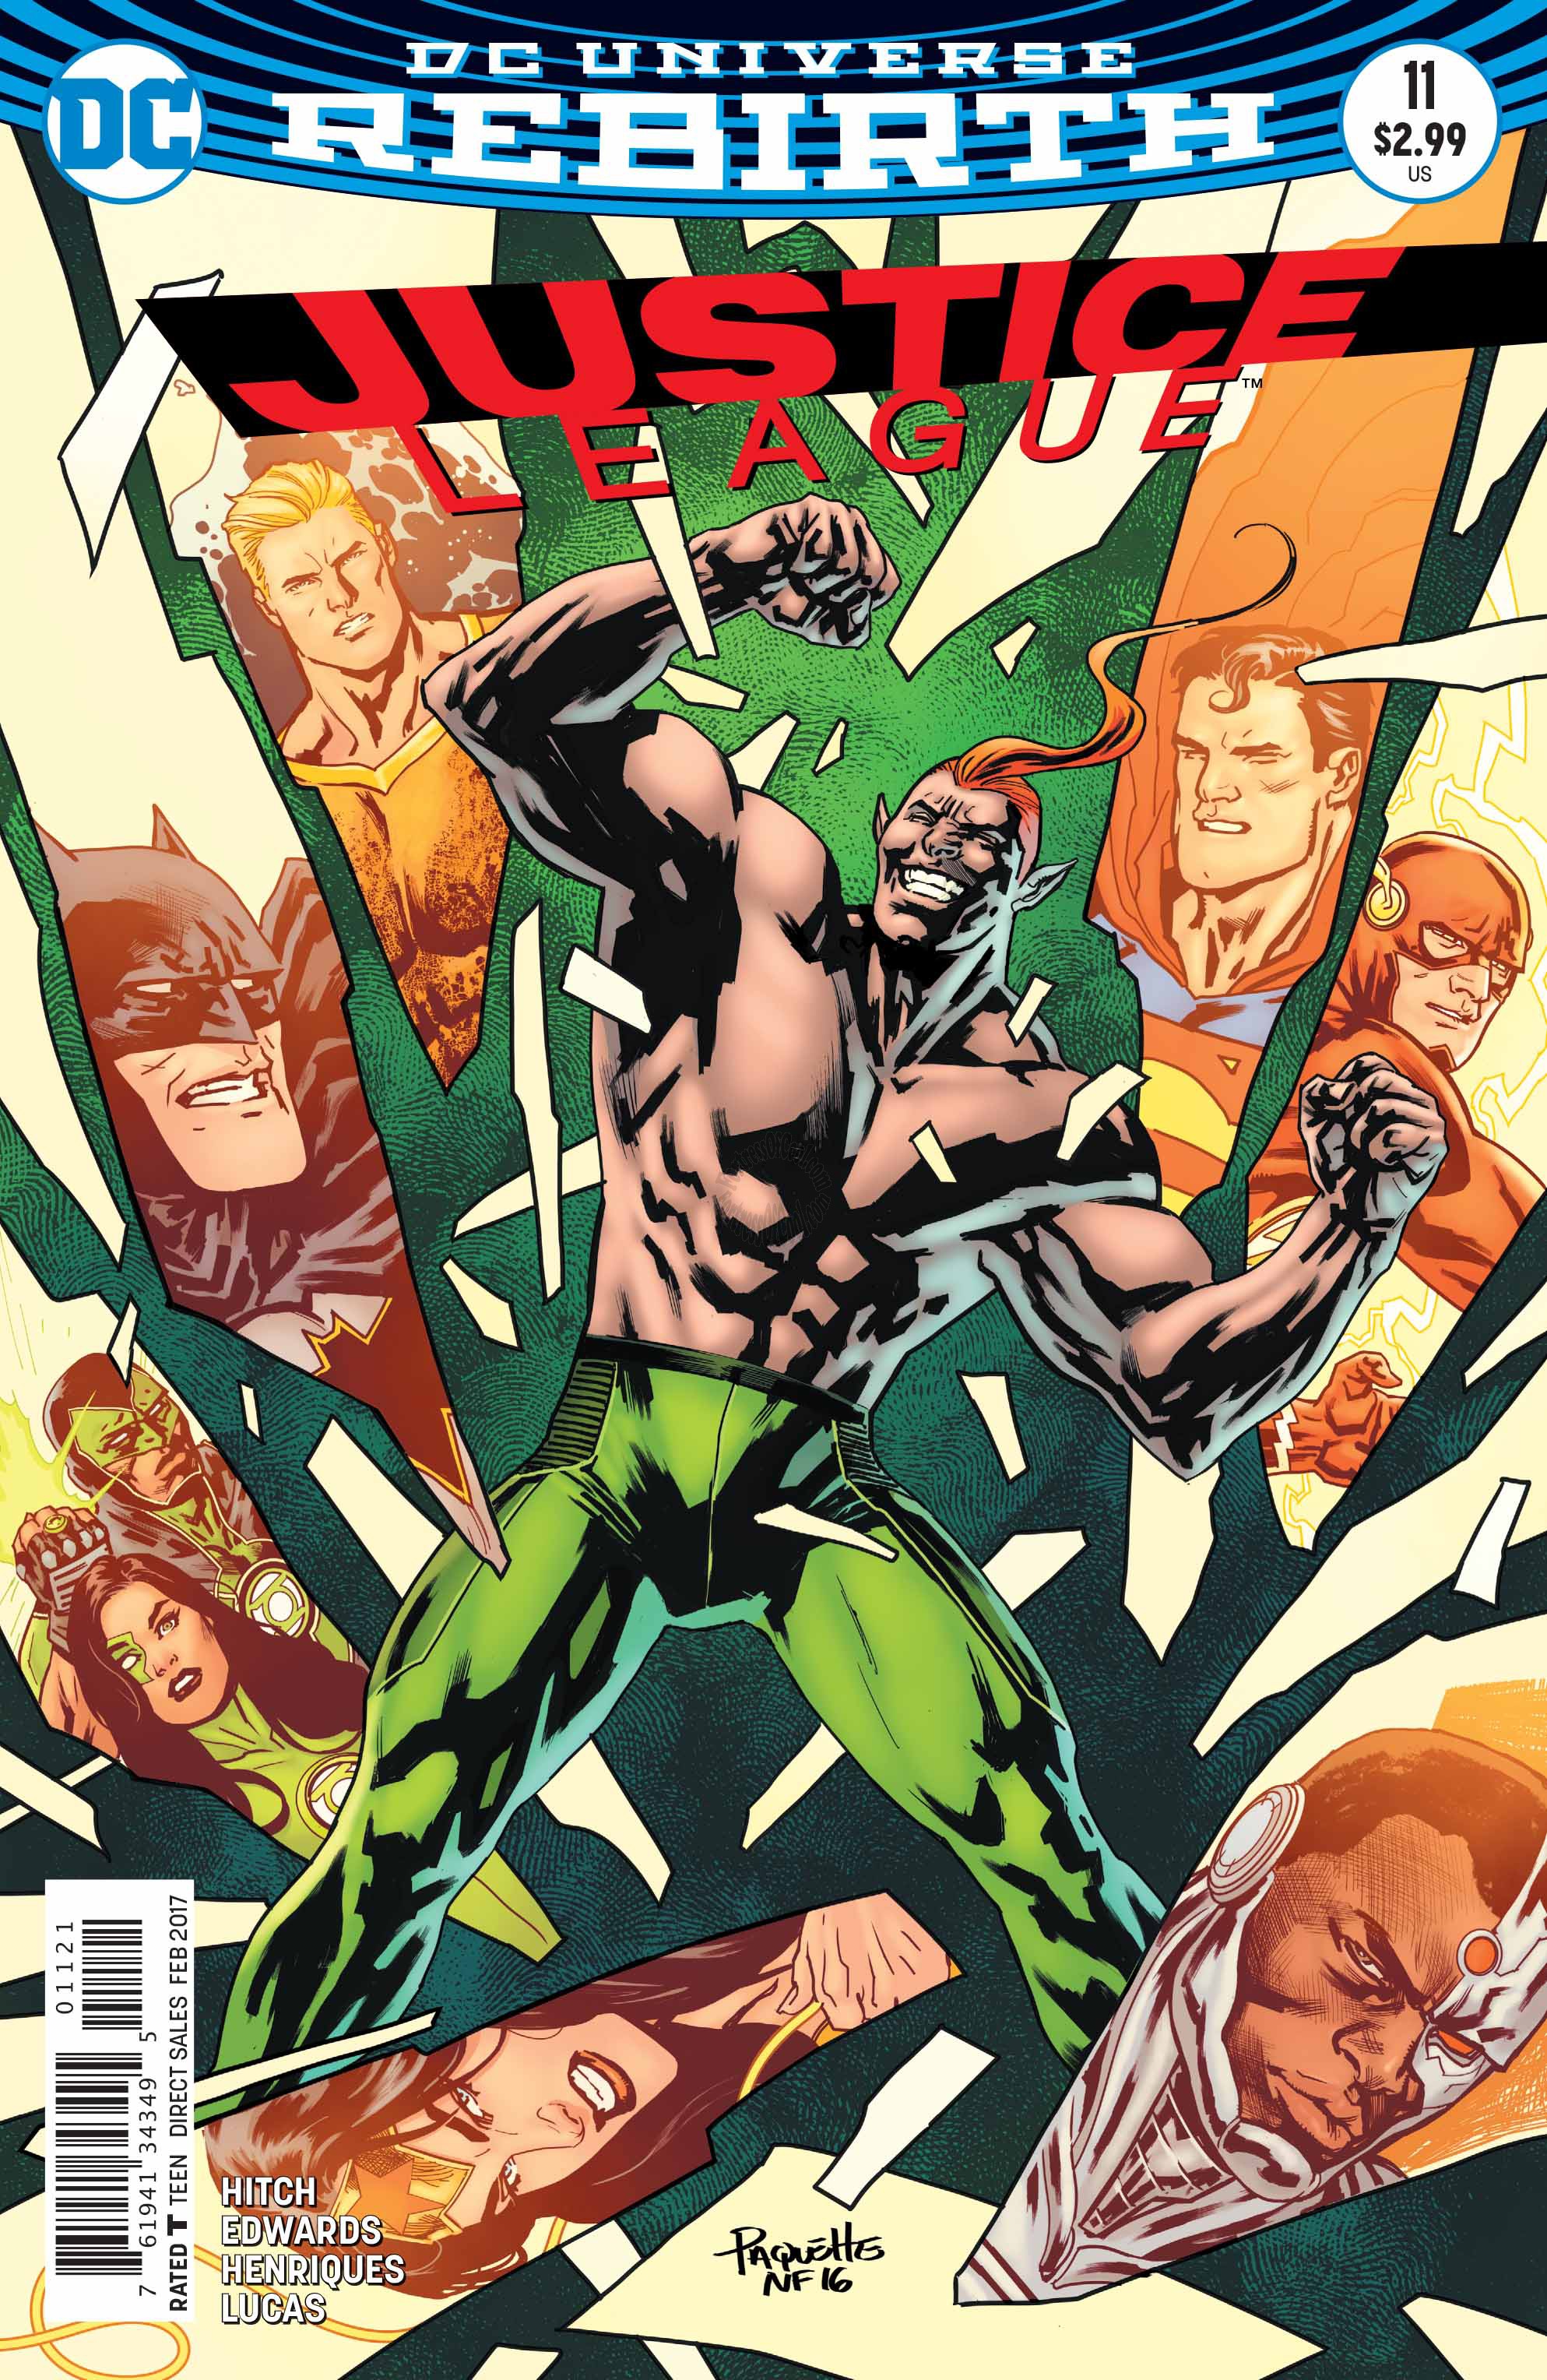 JUSTICE LEAGUE #11 VARIANT EDITION